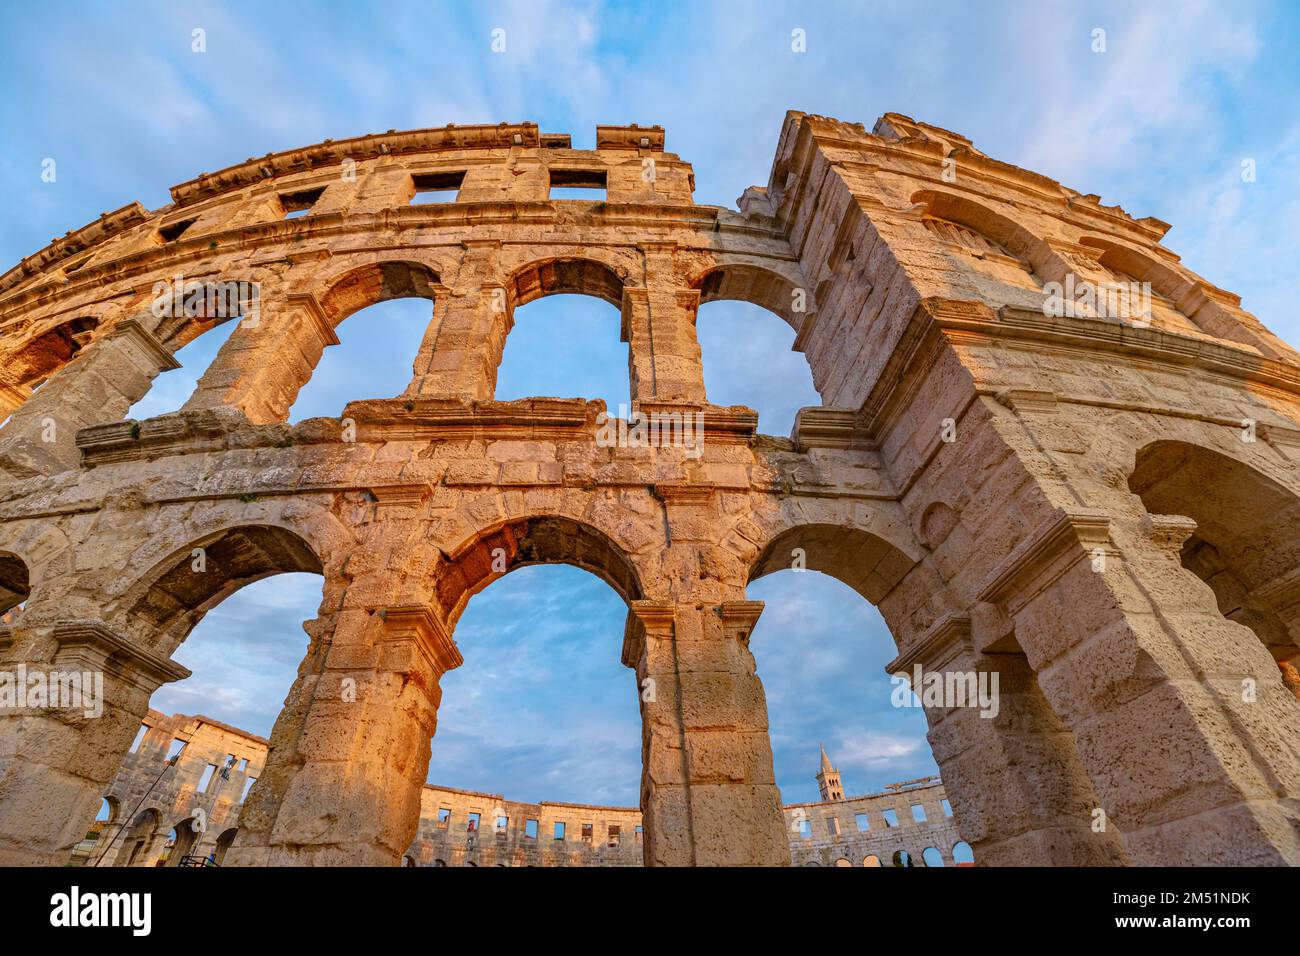 Pula Amphitheater at sunset, also known as Coliseum of Pula, is a well-preserved Roman amphitheater in Pula, Istria, Croatia. ancient arena was built Stock Photo